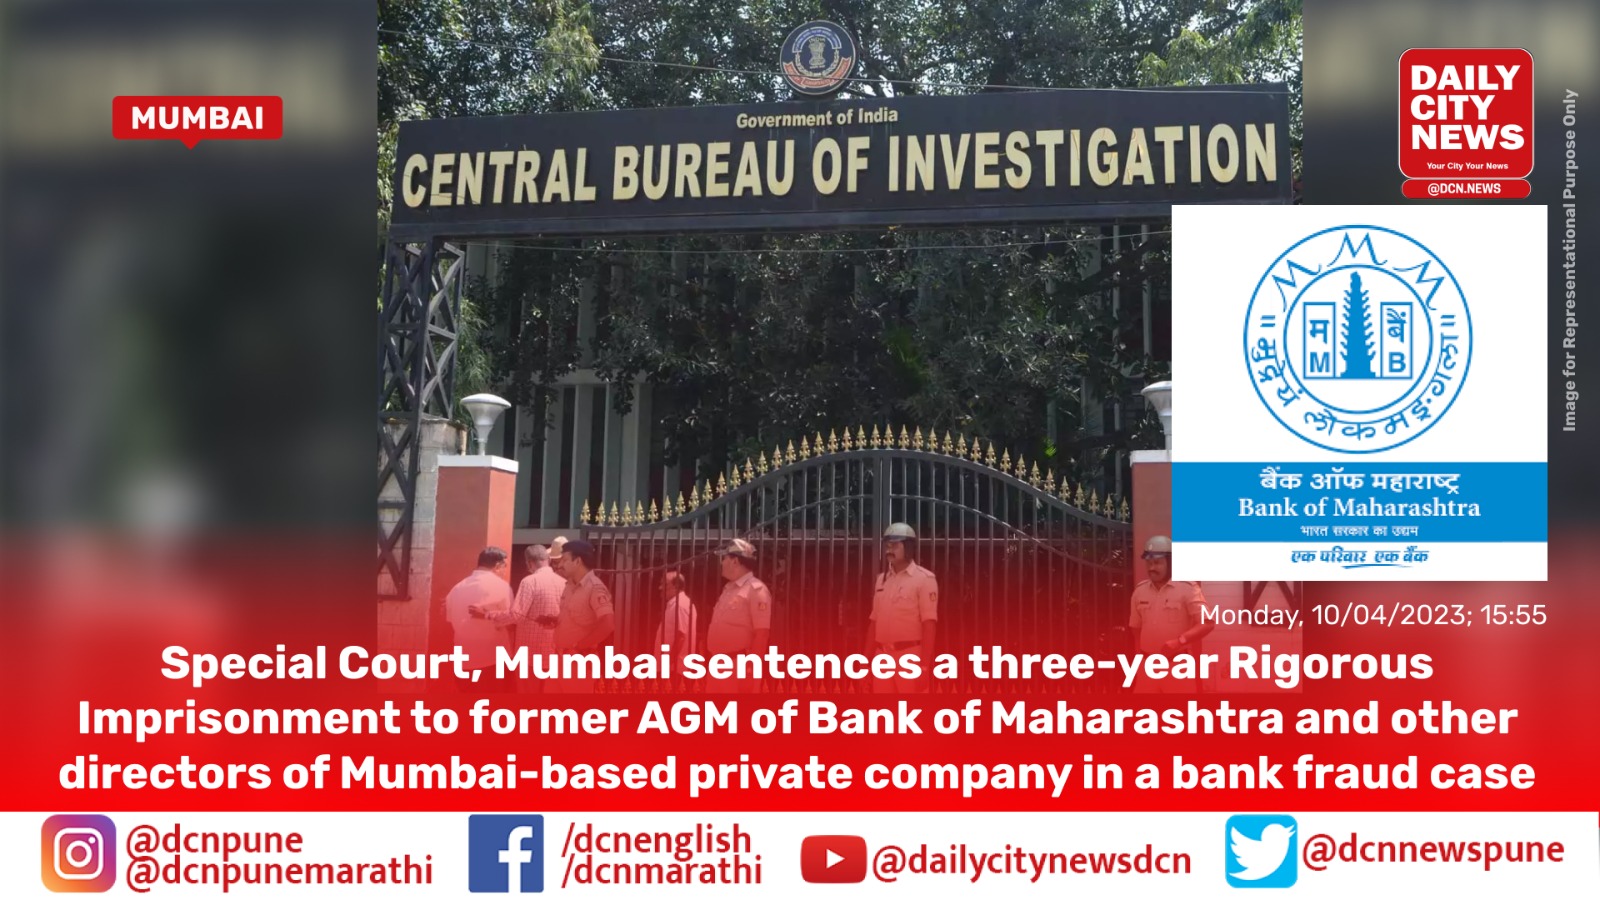 Special Court, Mumbai sentences a three-year Rigorous Imprisonment to former AGM of Bank of Maharashtra and other directors of Mumbai-based private company in a bank fraud case